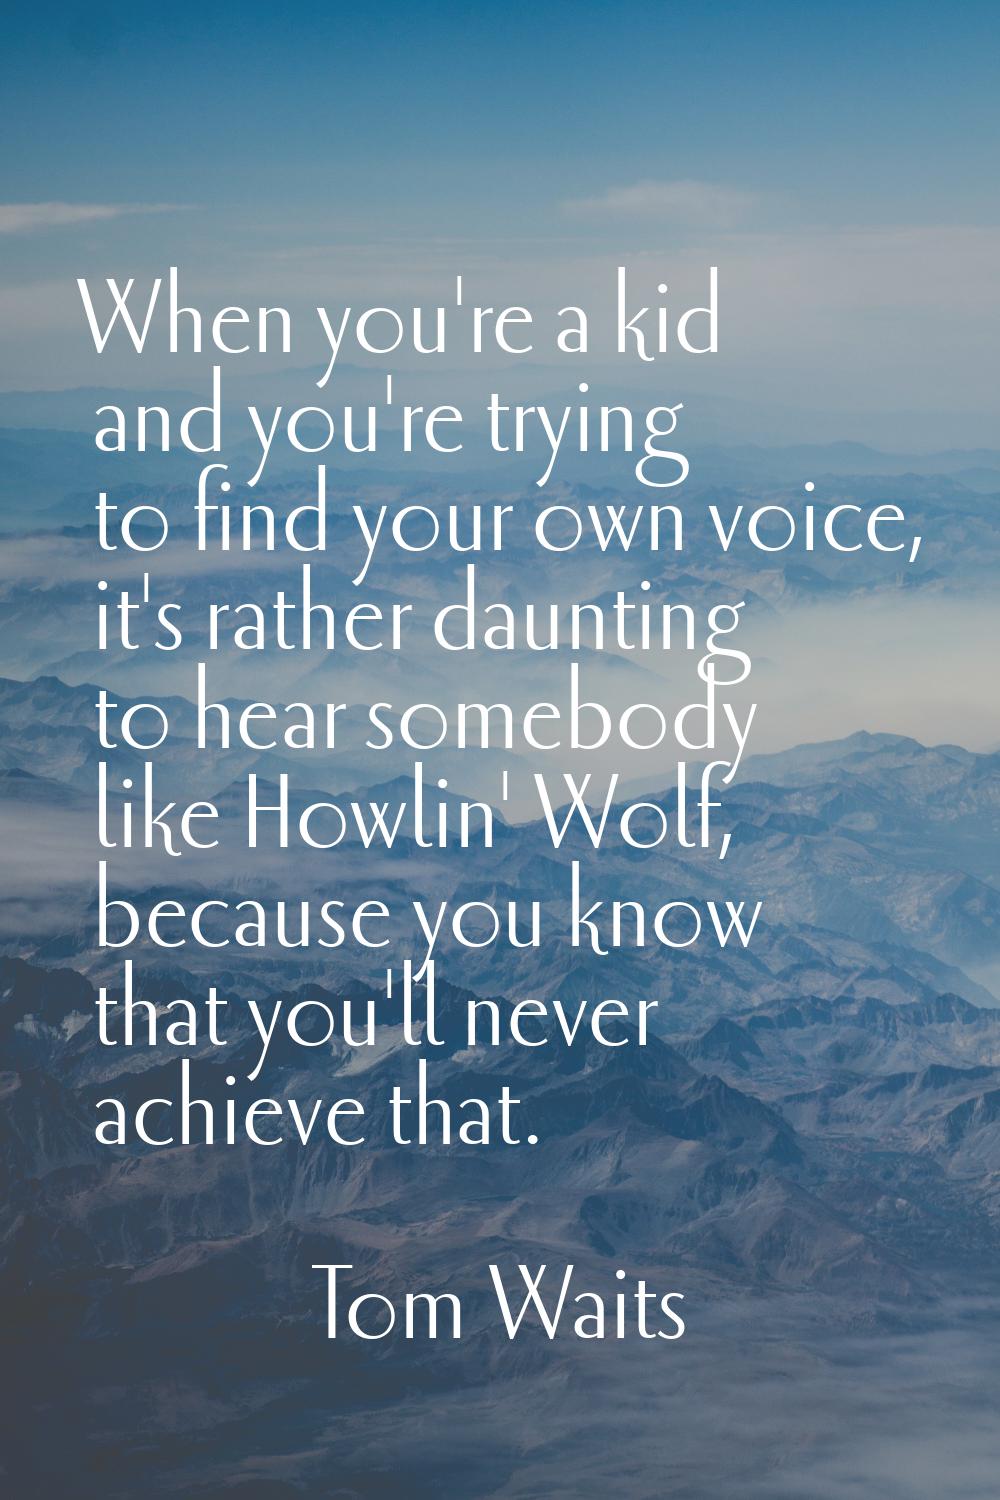 When you're a kid and you're trying to find your own voice, it's rather daunting to hear somebody l